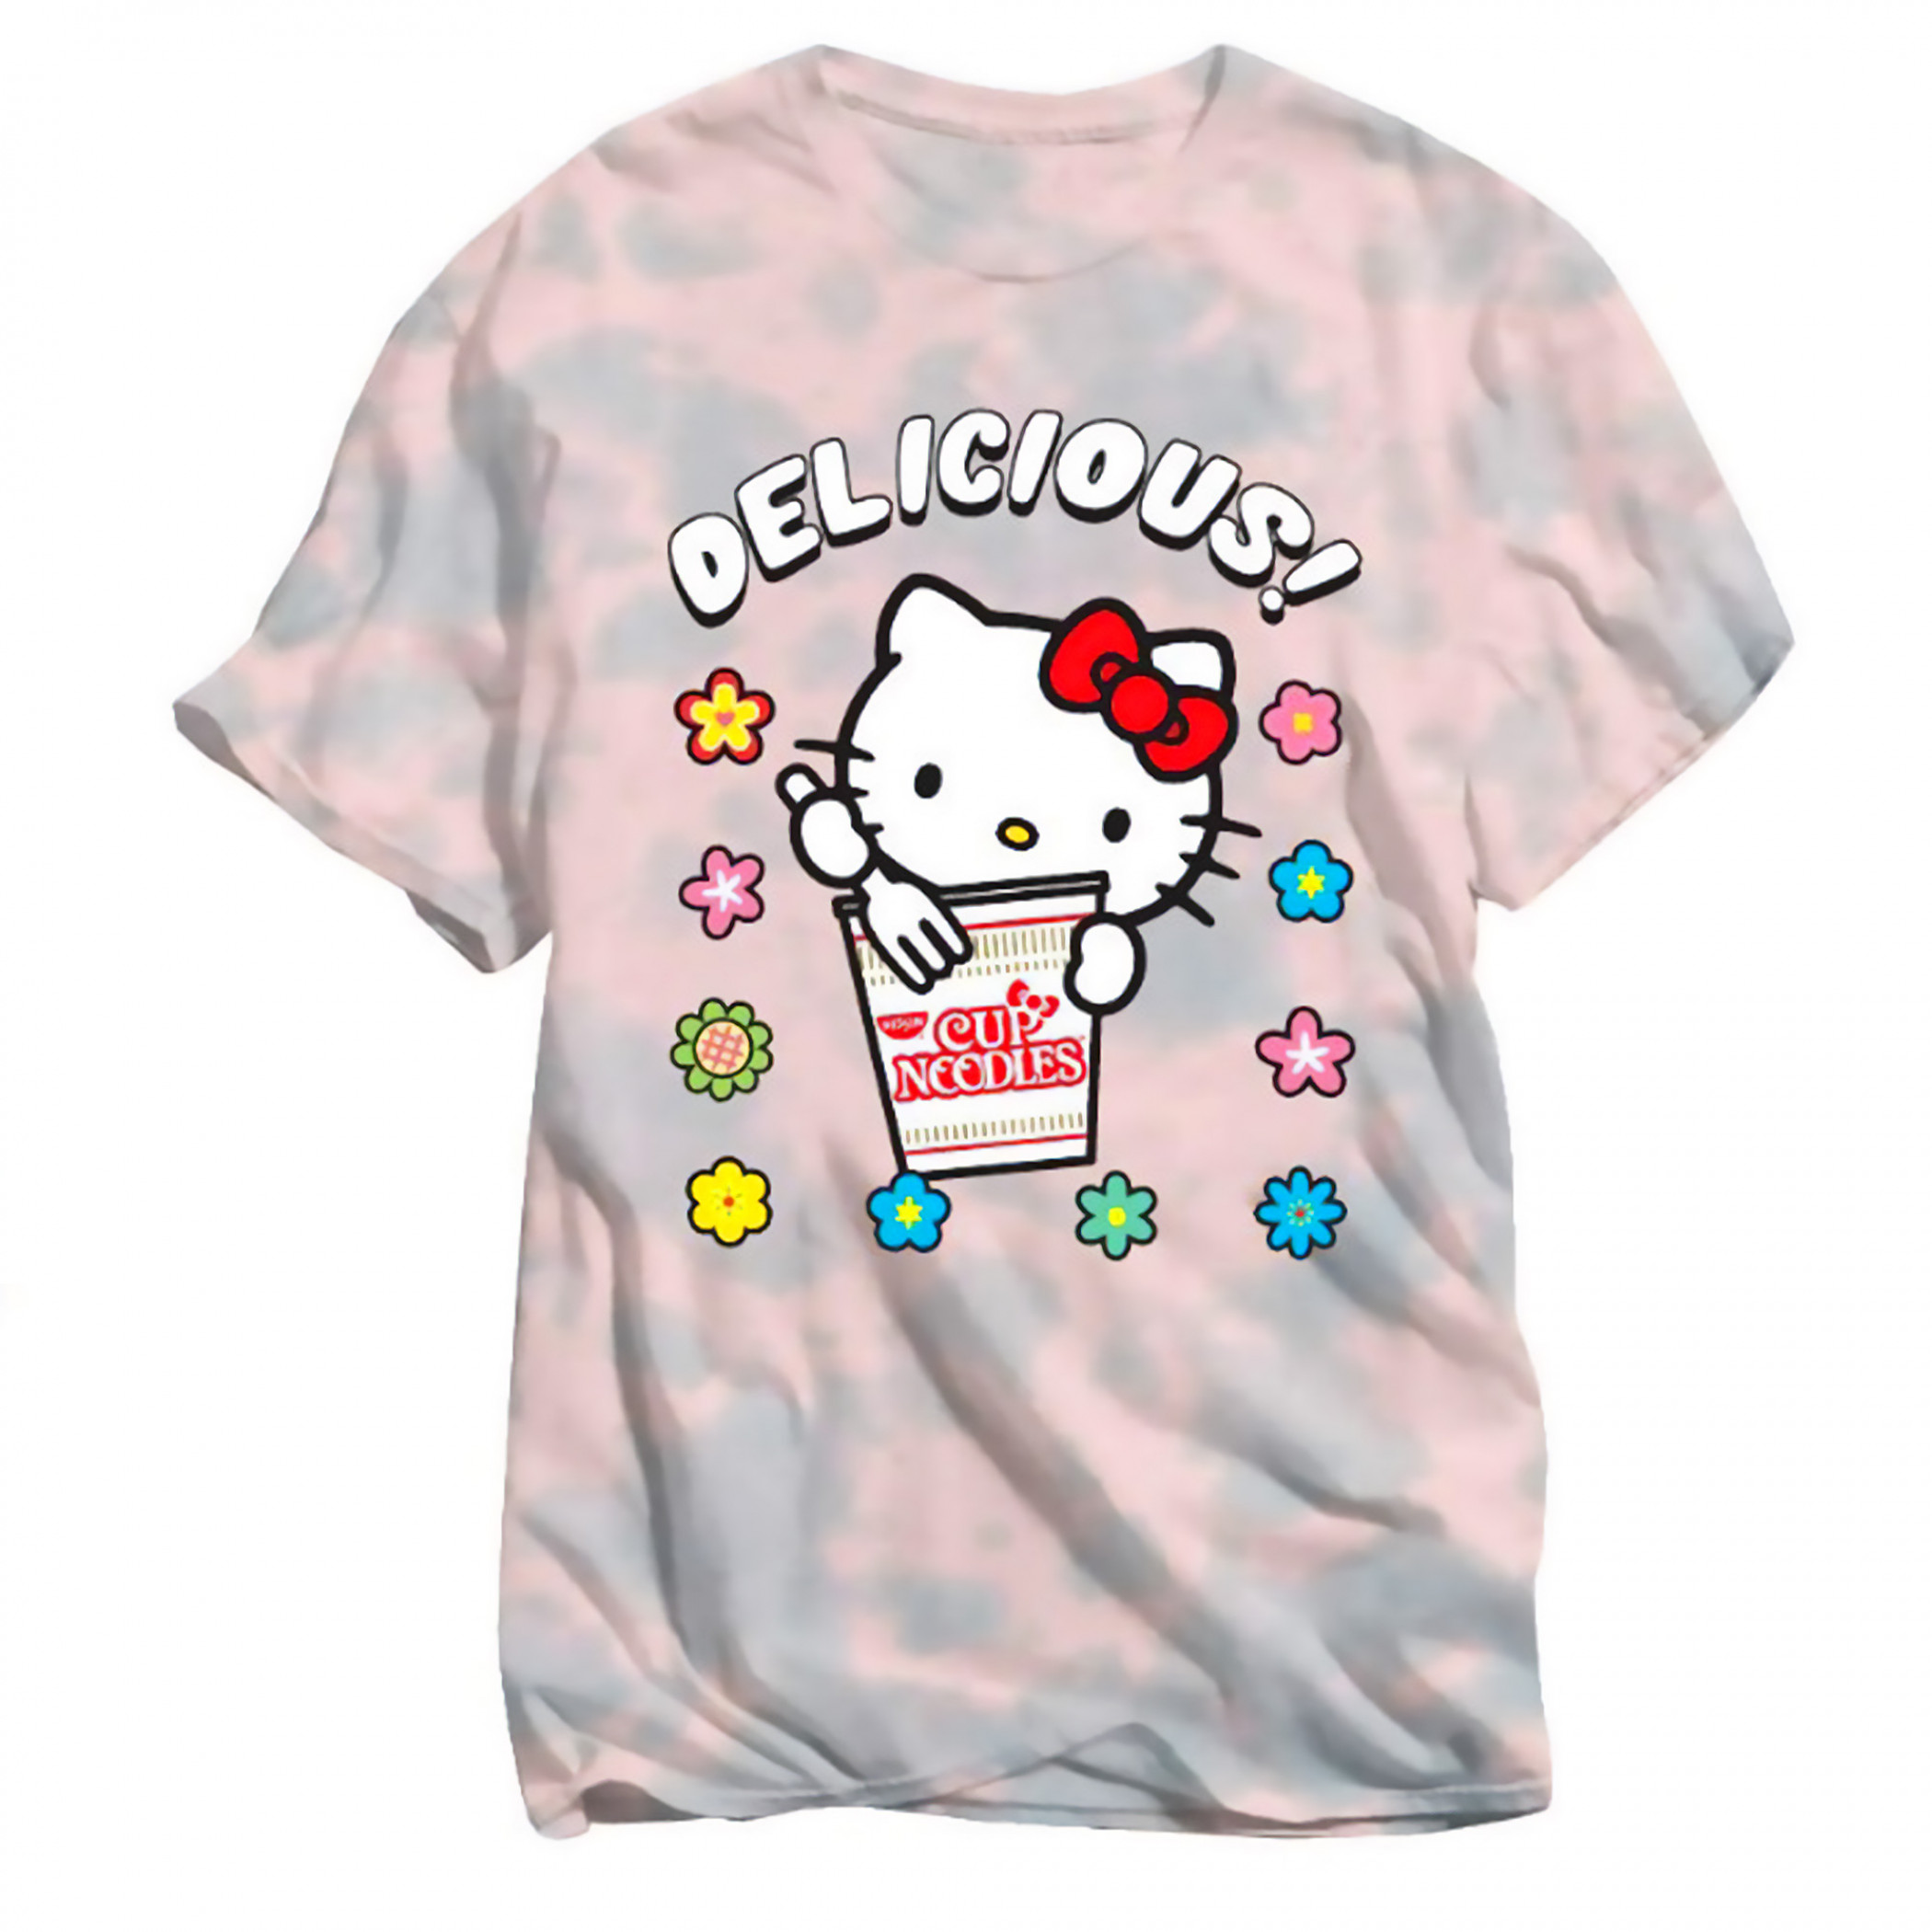 Hello Kitty X Cup Noodles Tie-Dye T-Shirt